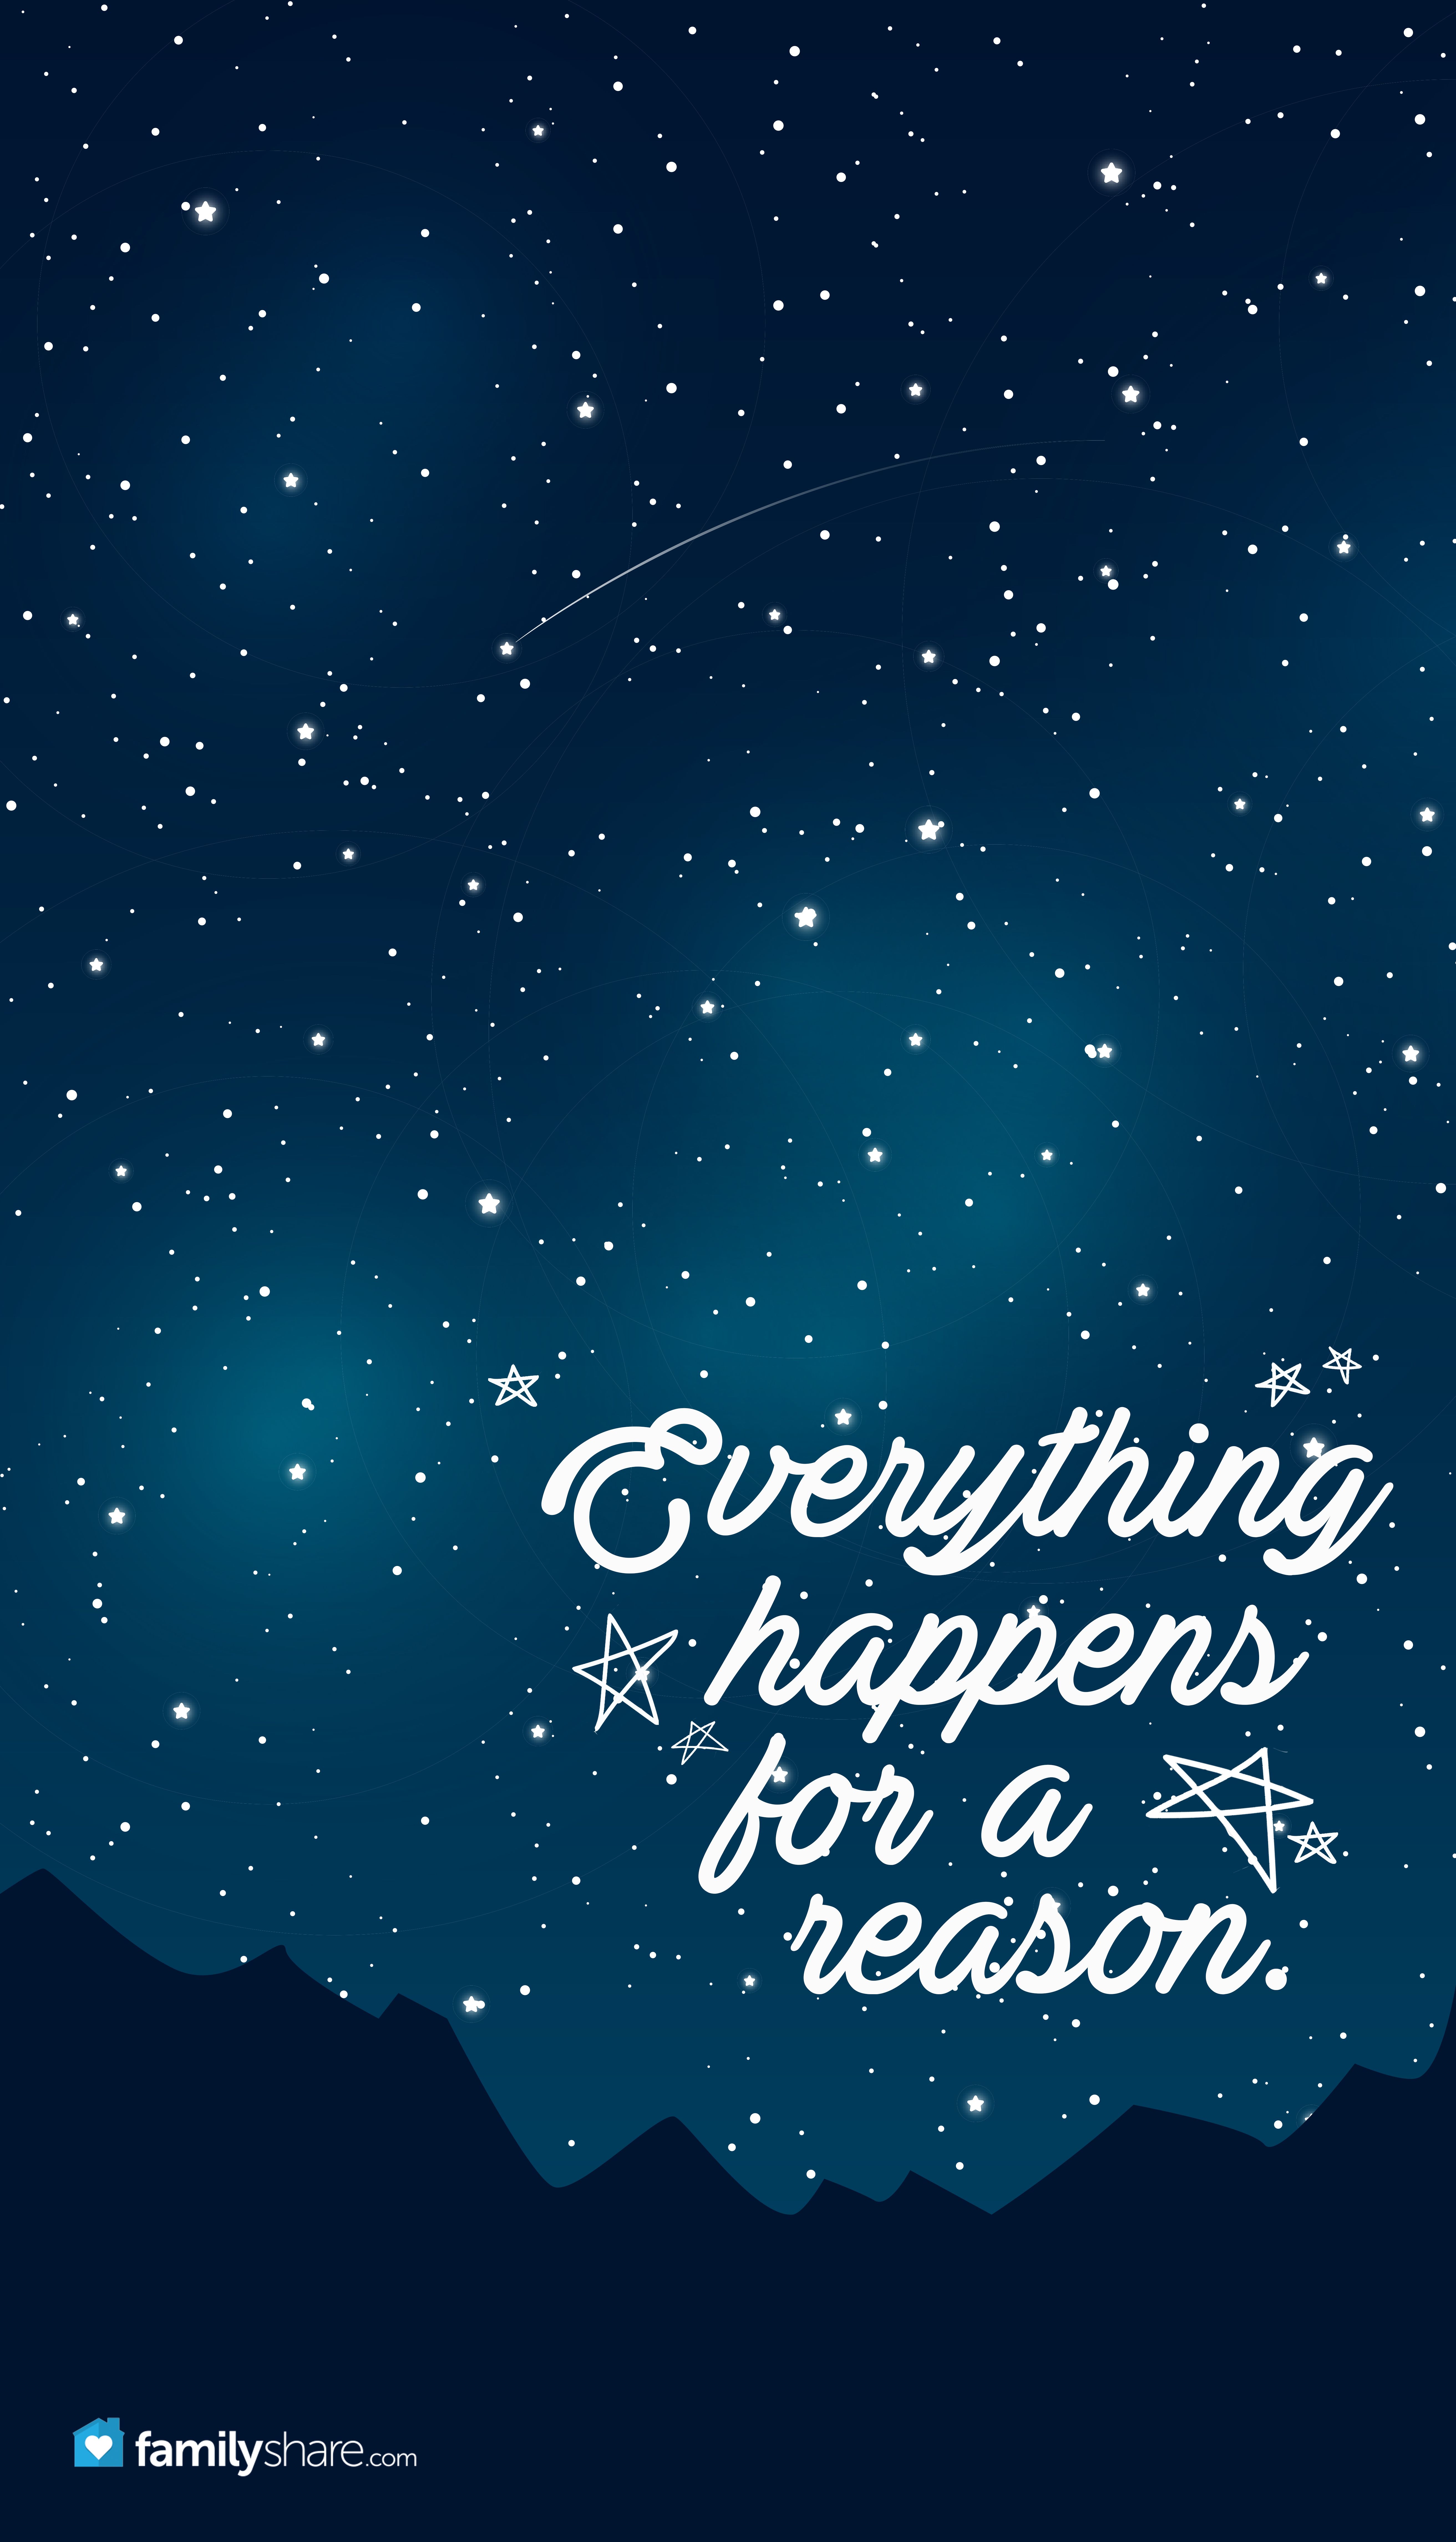 Everything happens for a reason. iphone wallpaper #phone #background # wallpaper #phone #familyshare. Wallpaper quotes, Life quotes, Inspirational quotes